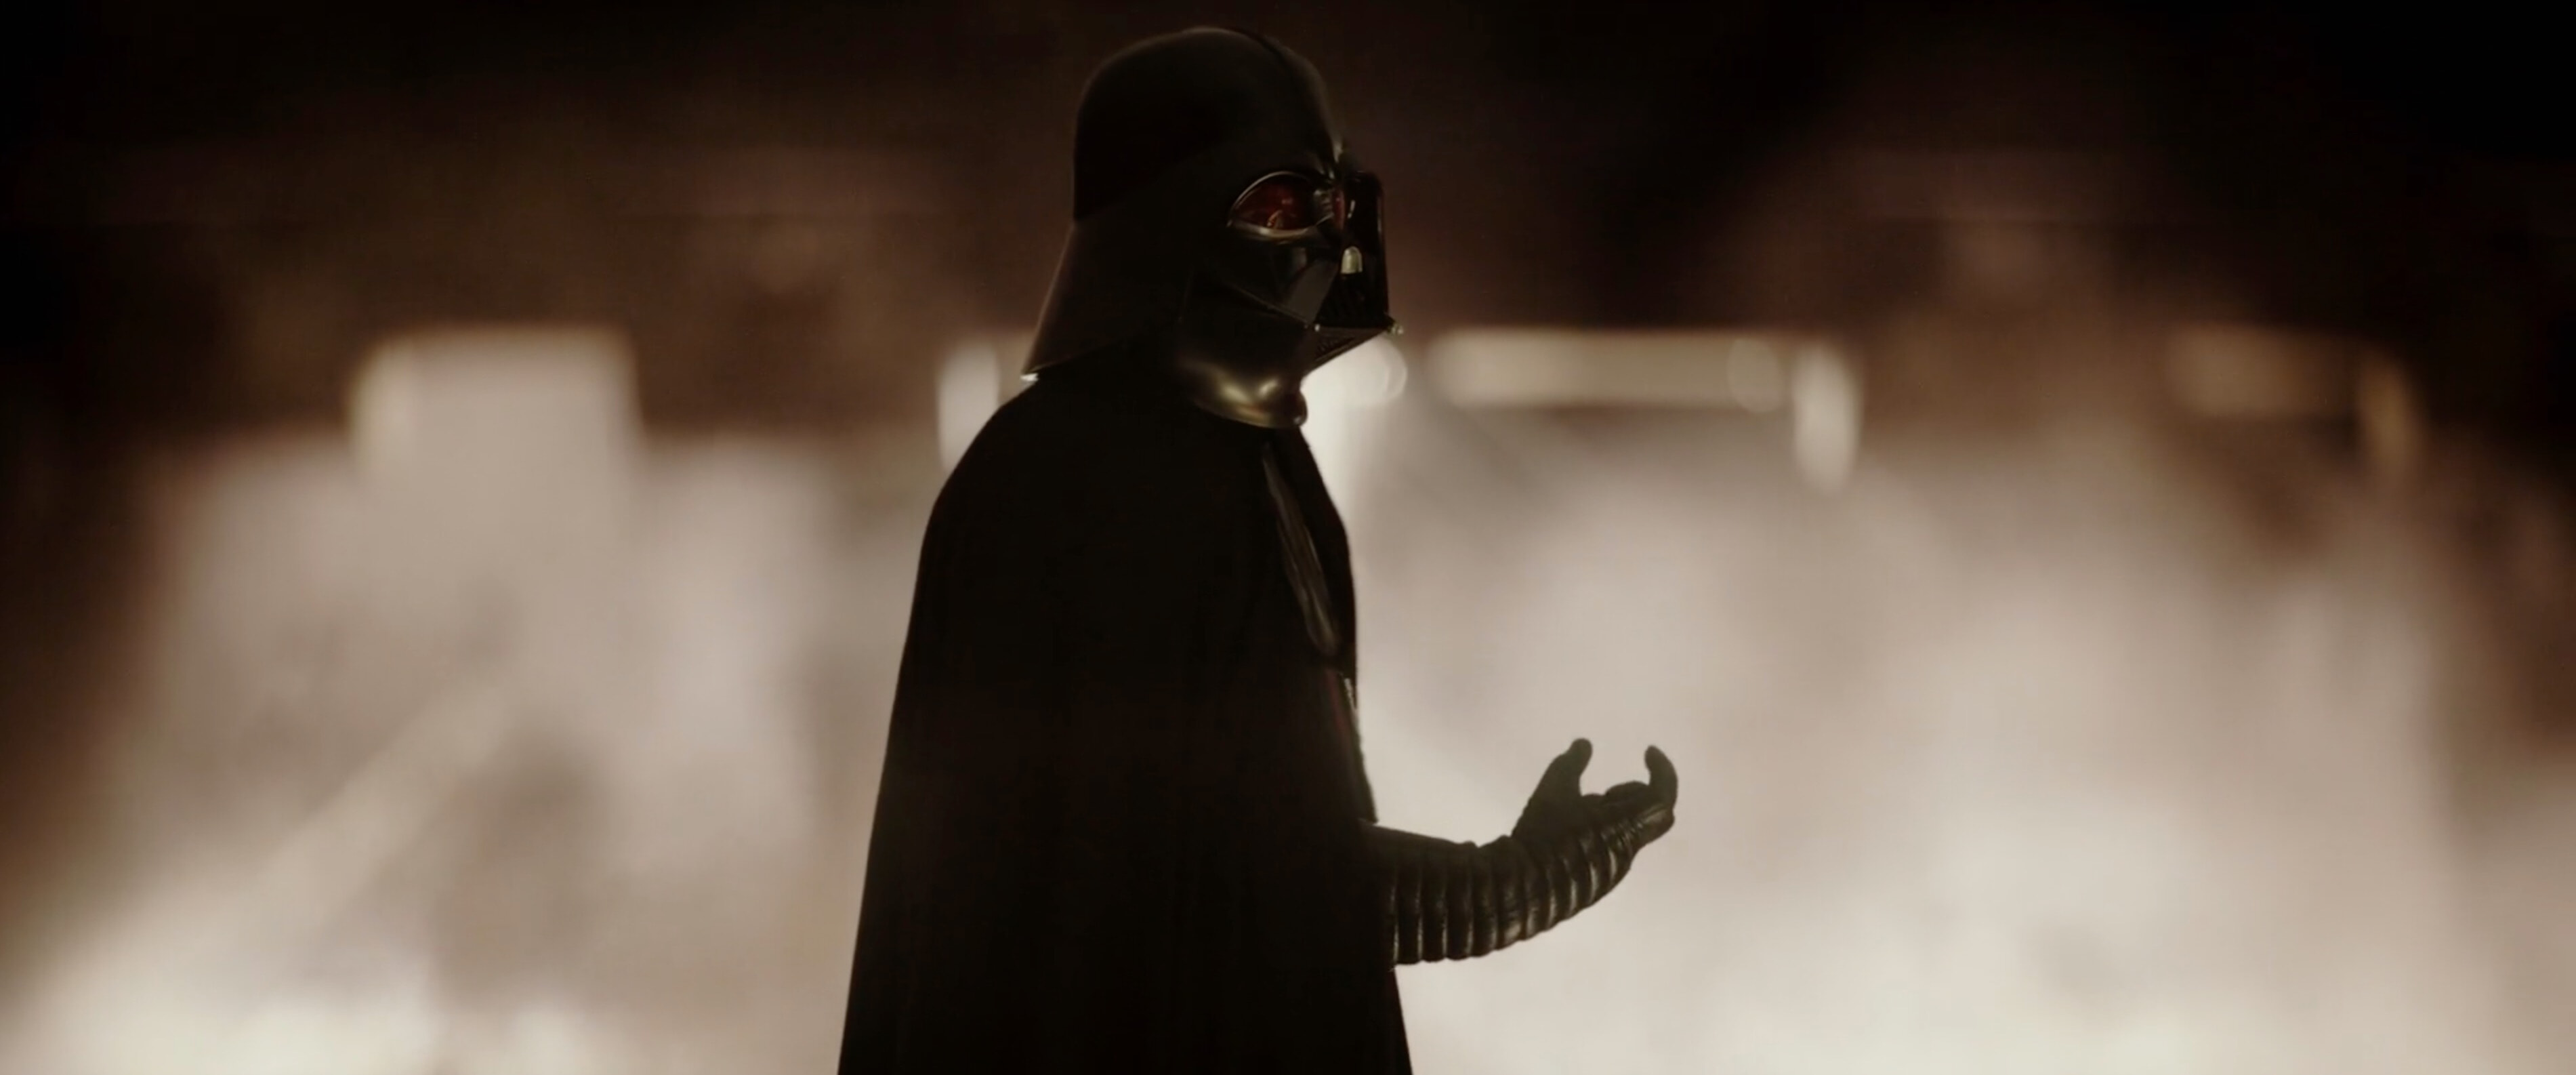 Darth Vader in “Rogue One”, pinching his finger and thumb to choke a colleague to teach him a friendly lesson.